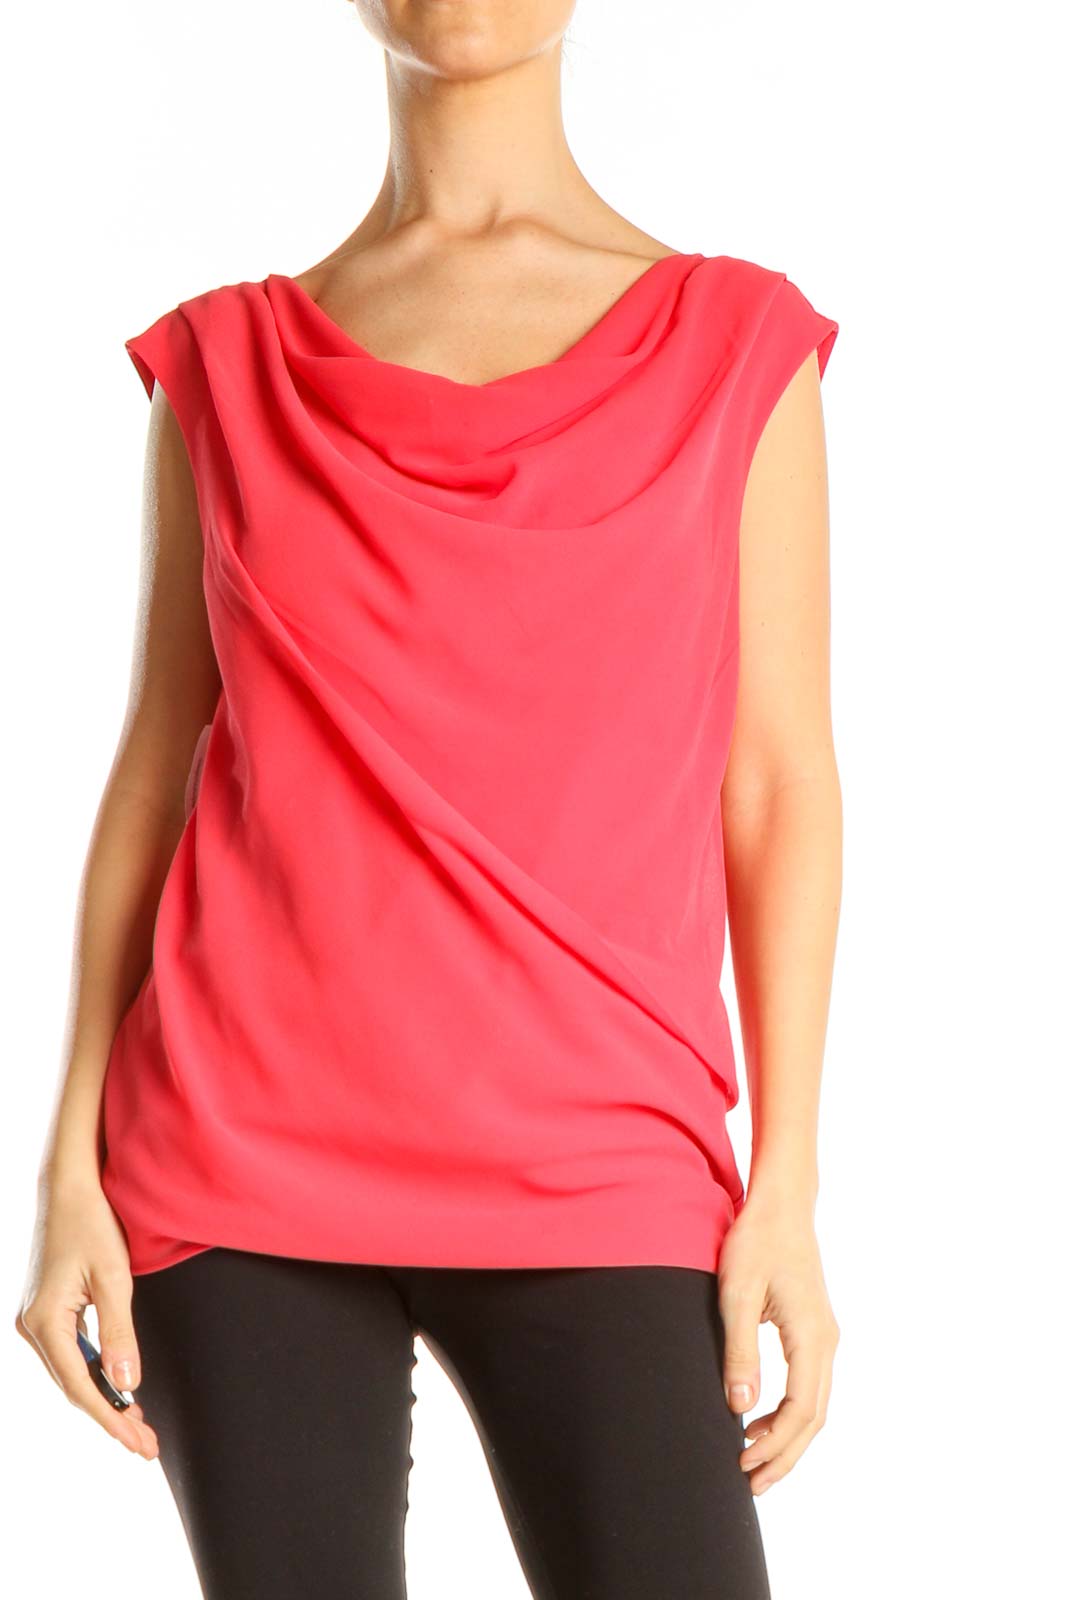 Pink Cowl Neck All Day Wear Top Front